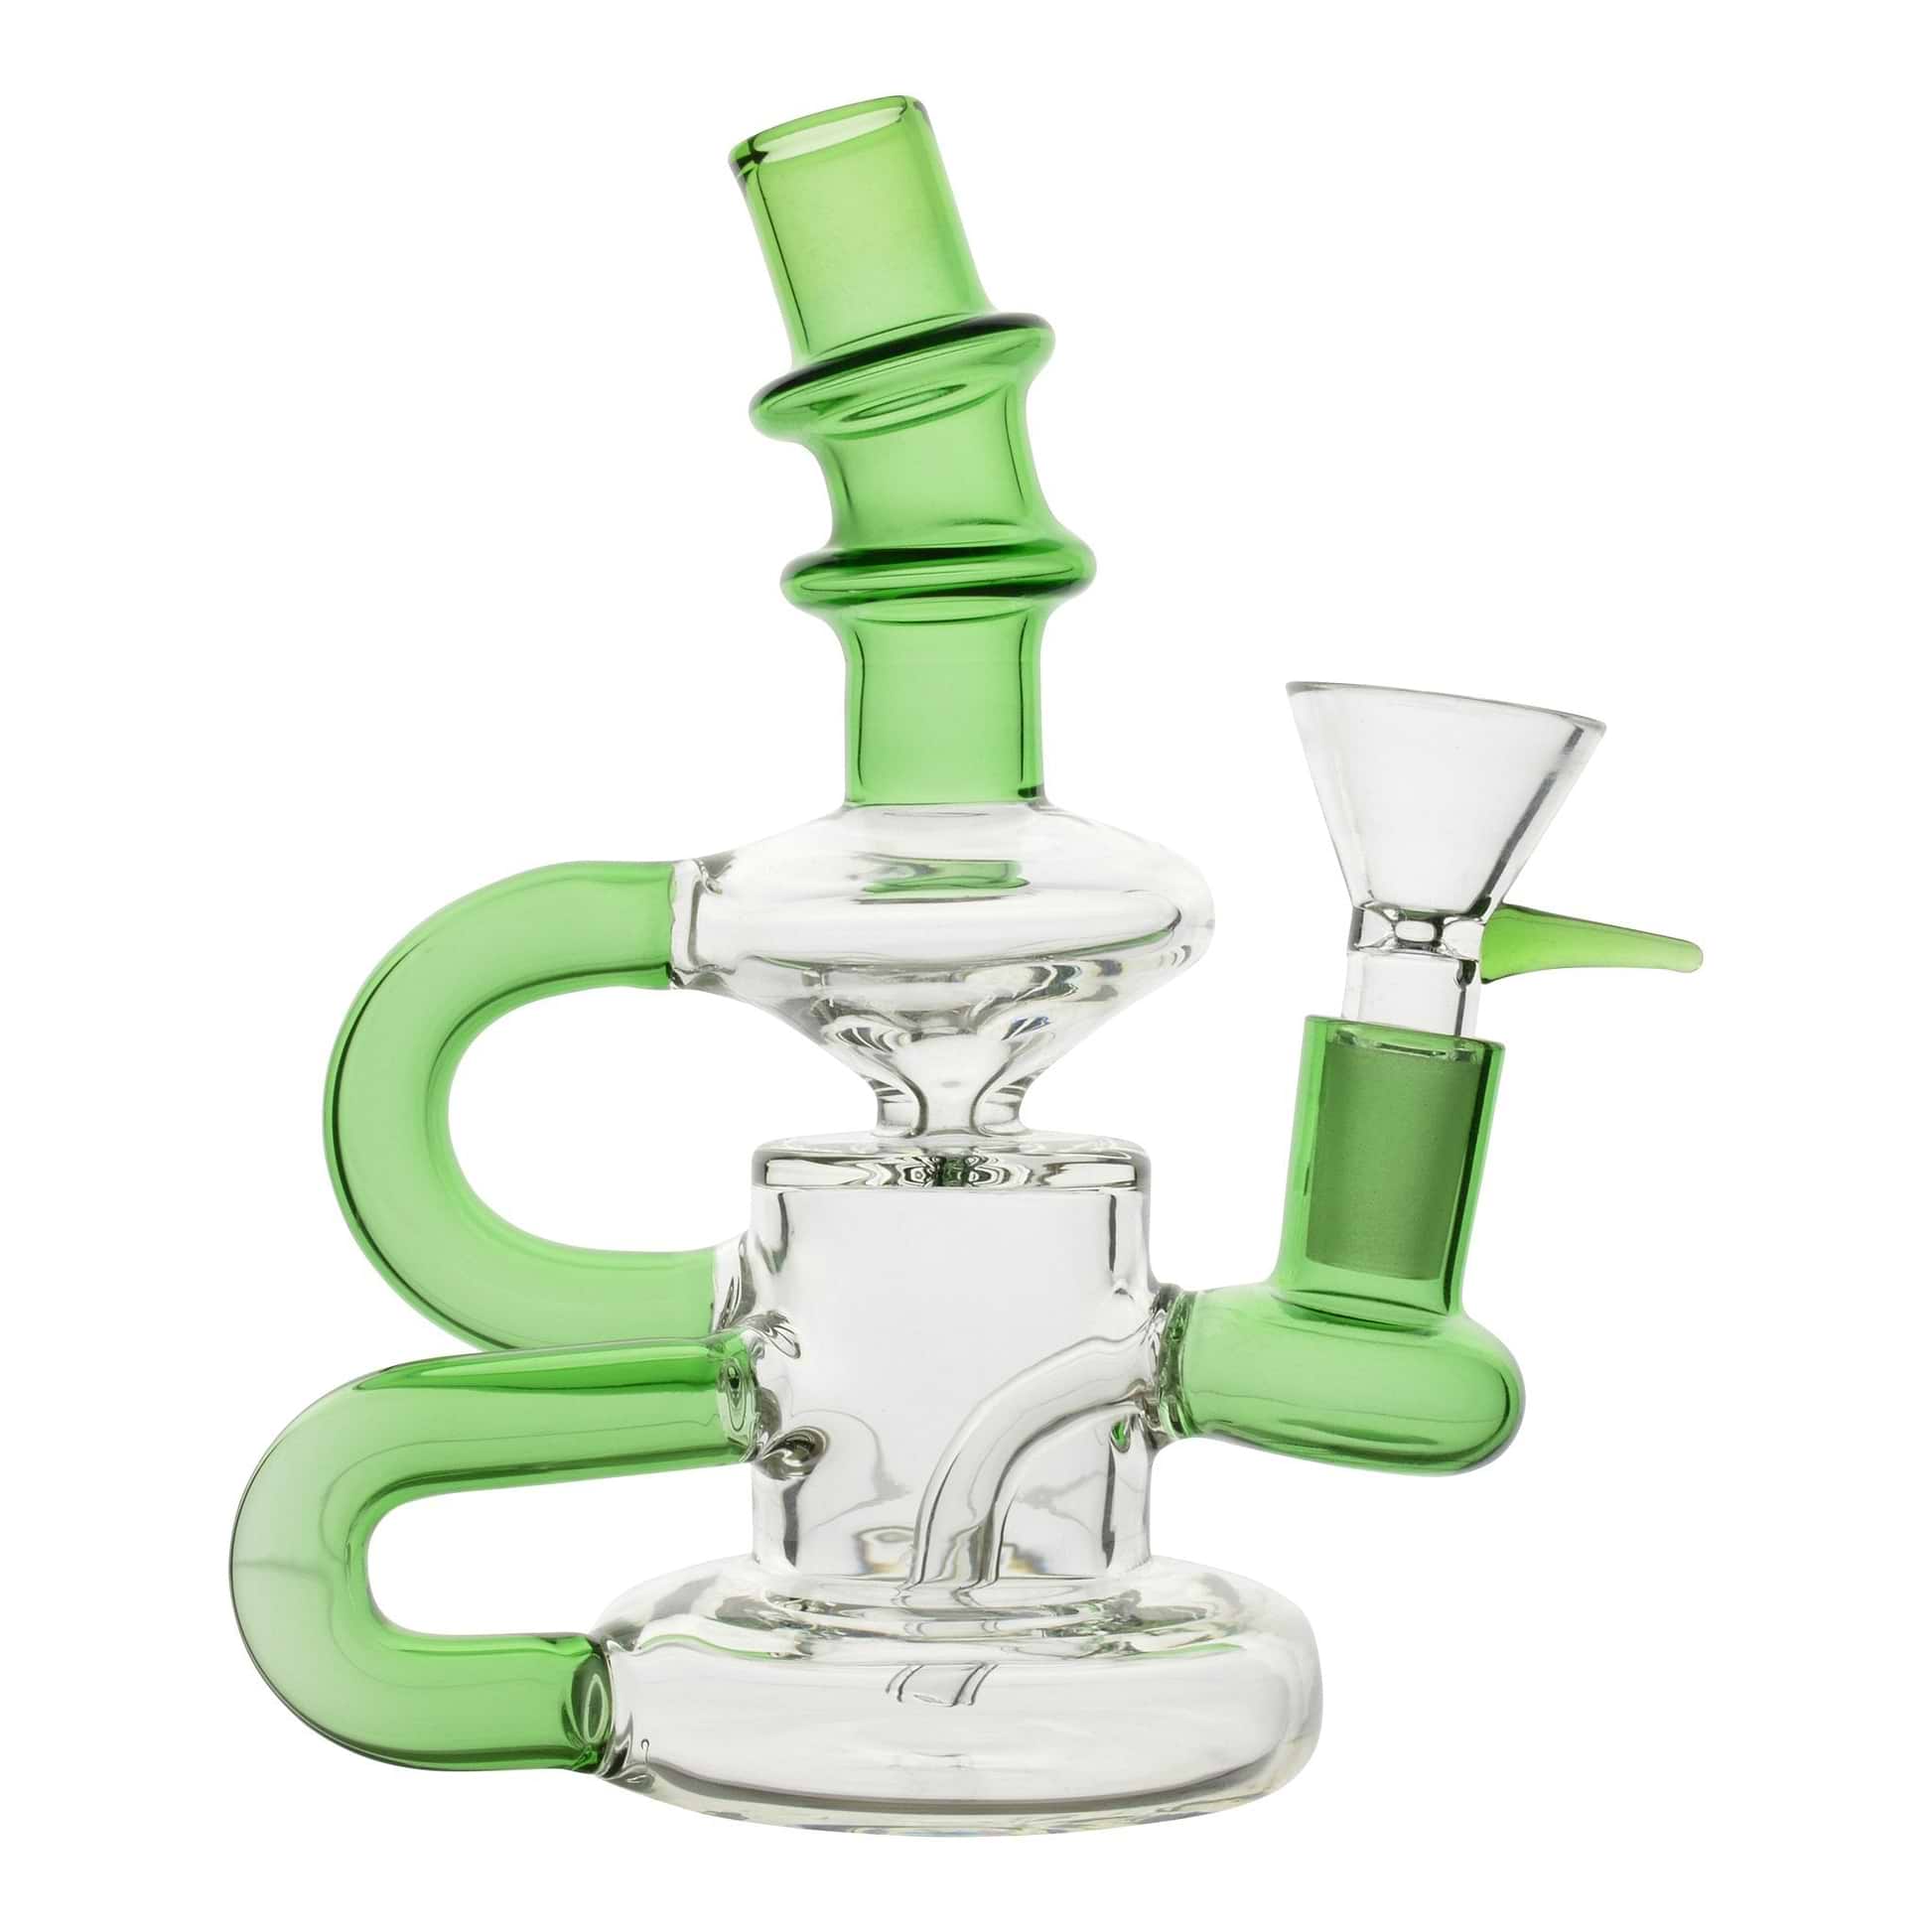 Full front shot of 6 inch glass bong green and clear colors mouthpiece facing left bowl on the right spiral B shape